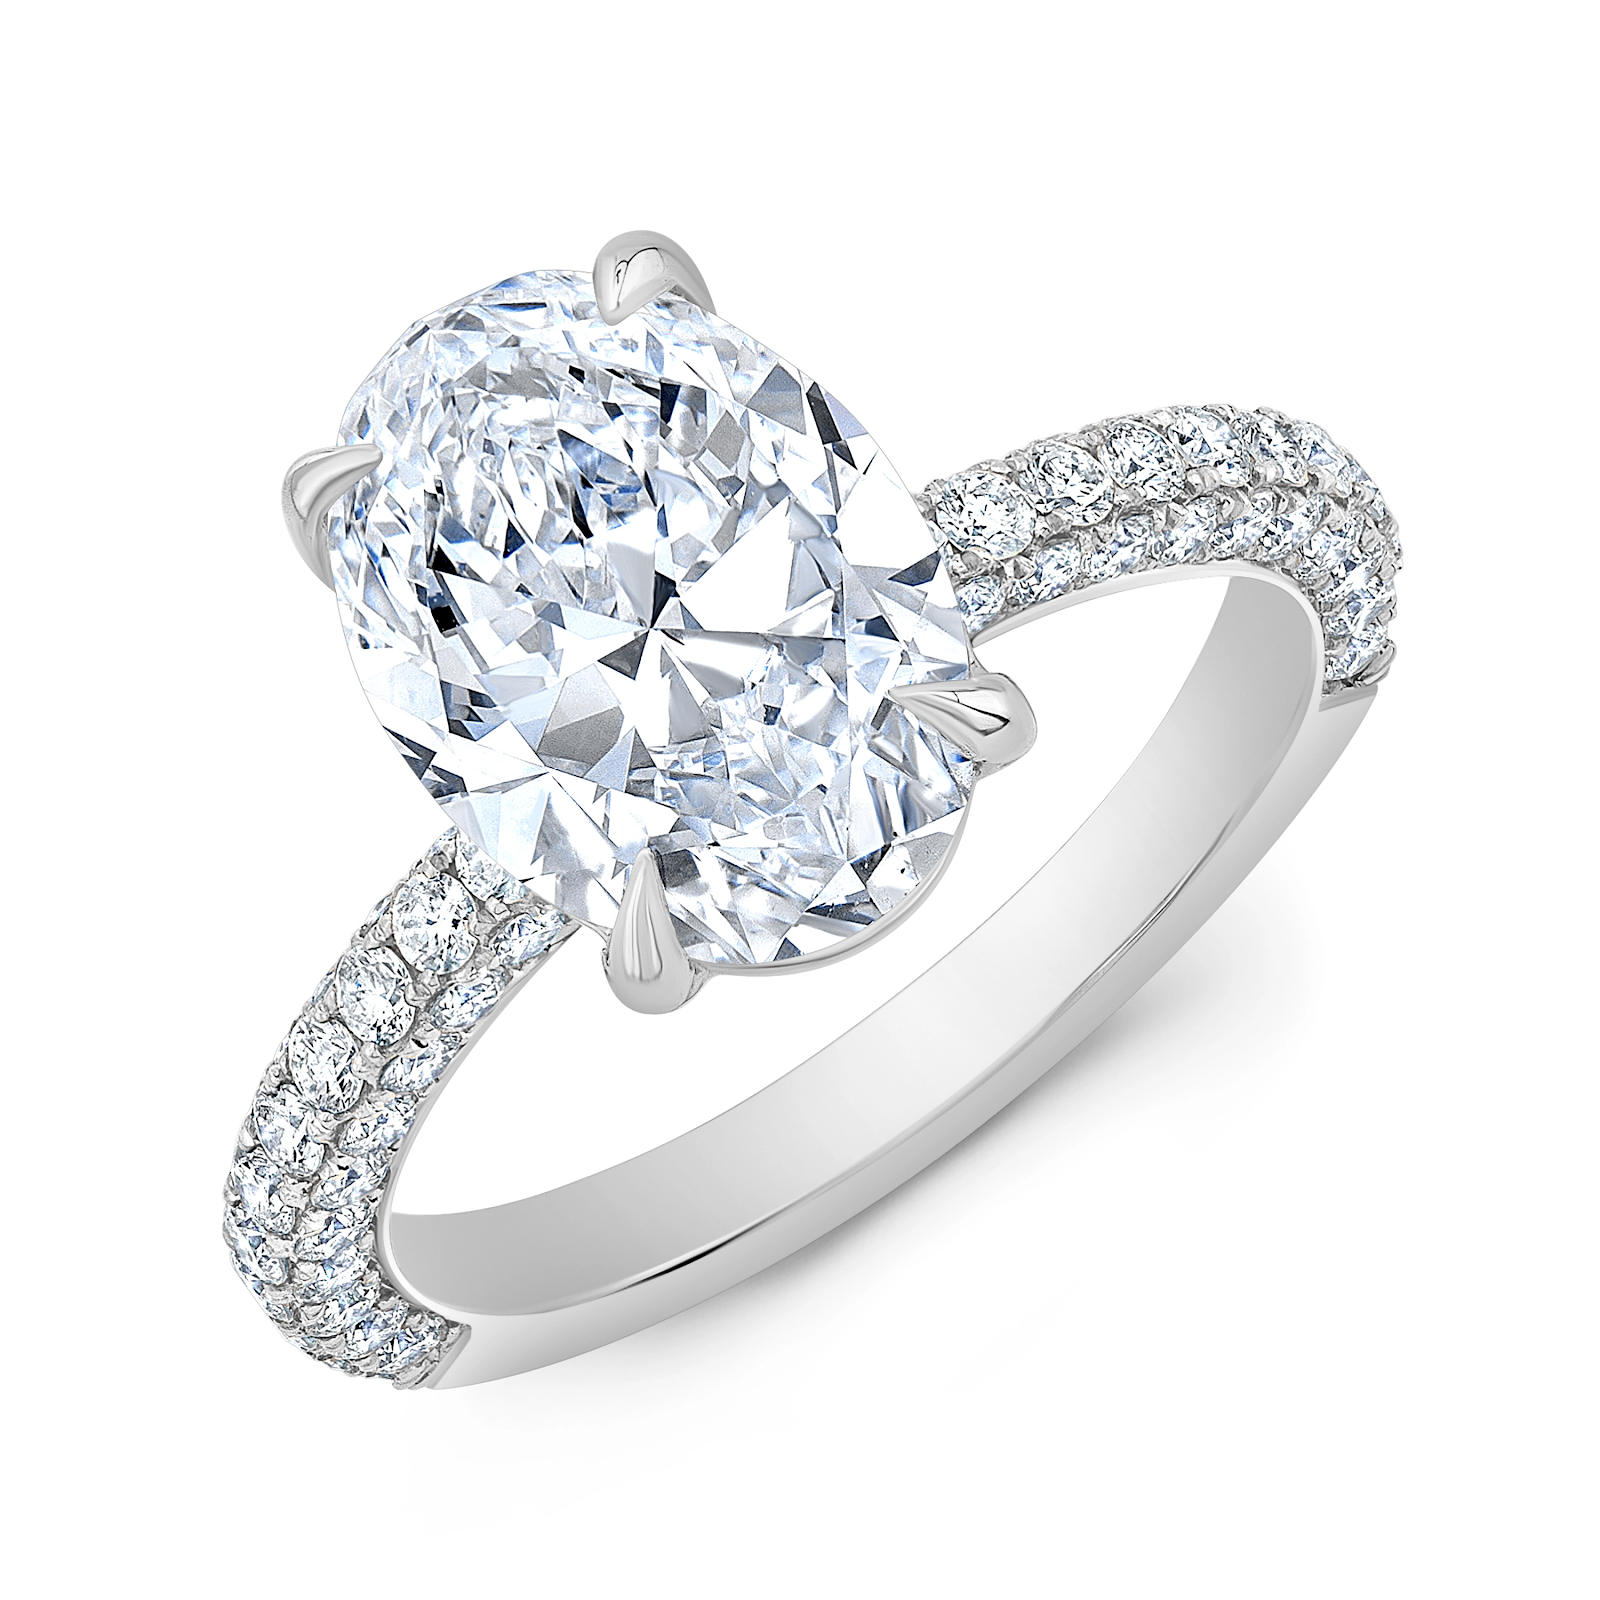 The Most Beautiful Diamond Rings for Spring | Grand Diamonds